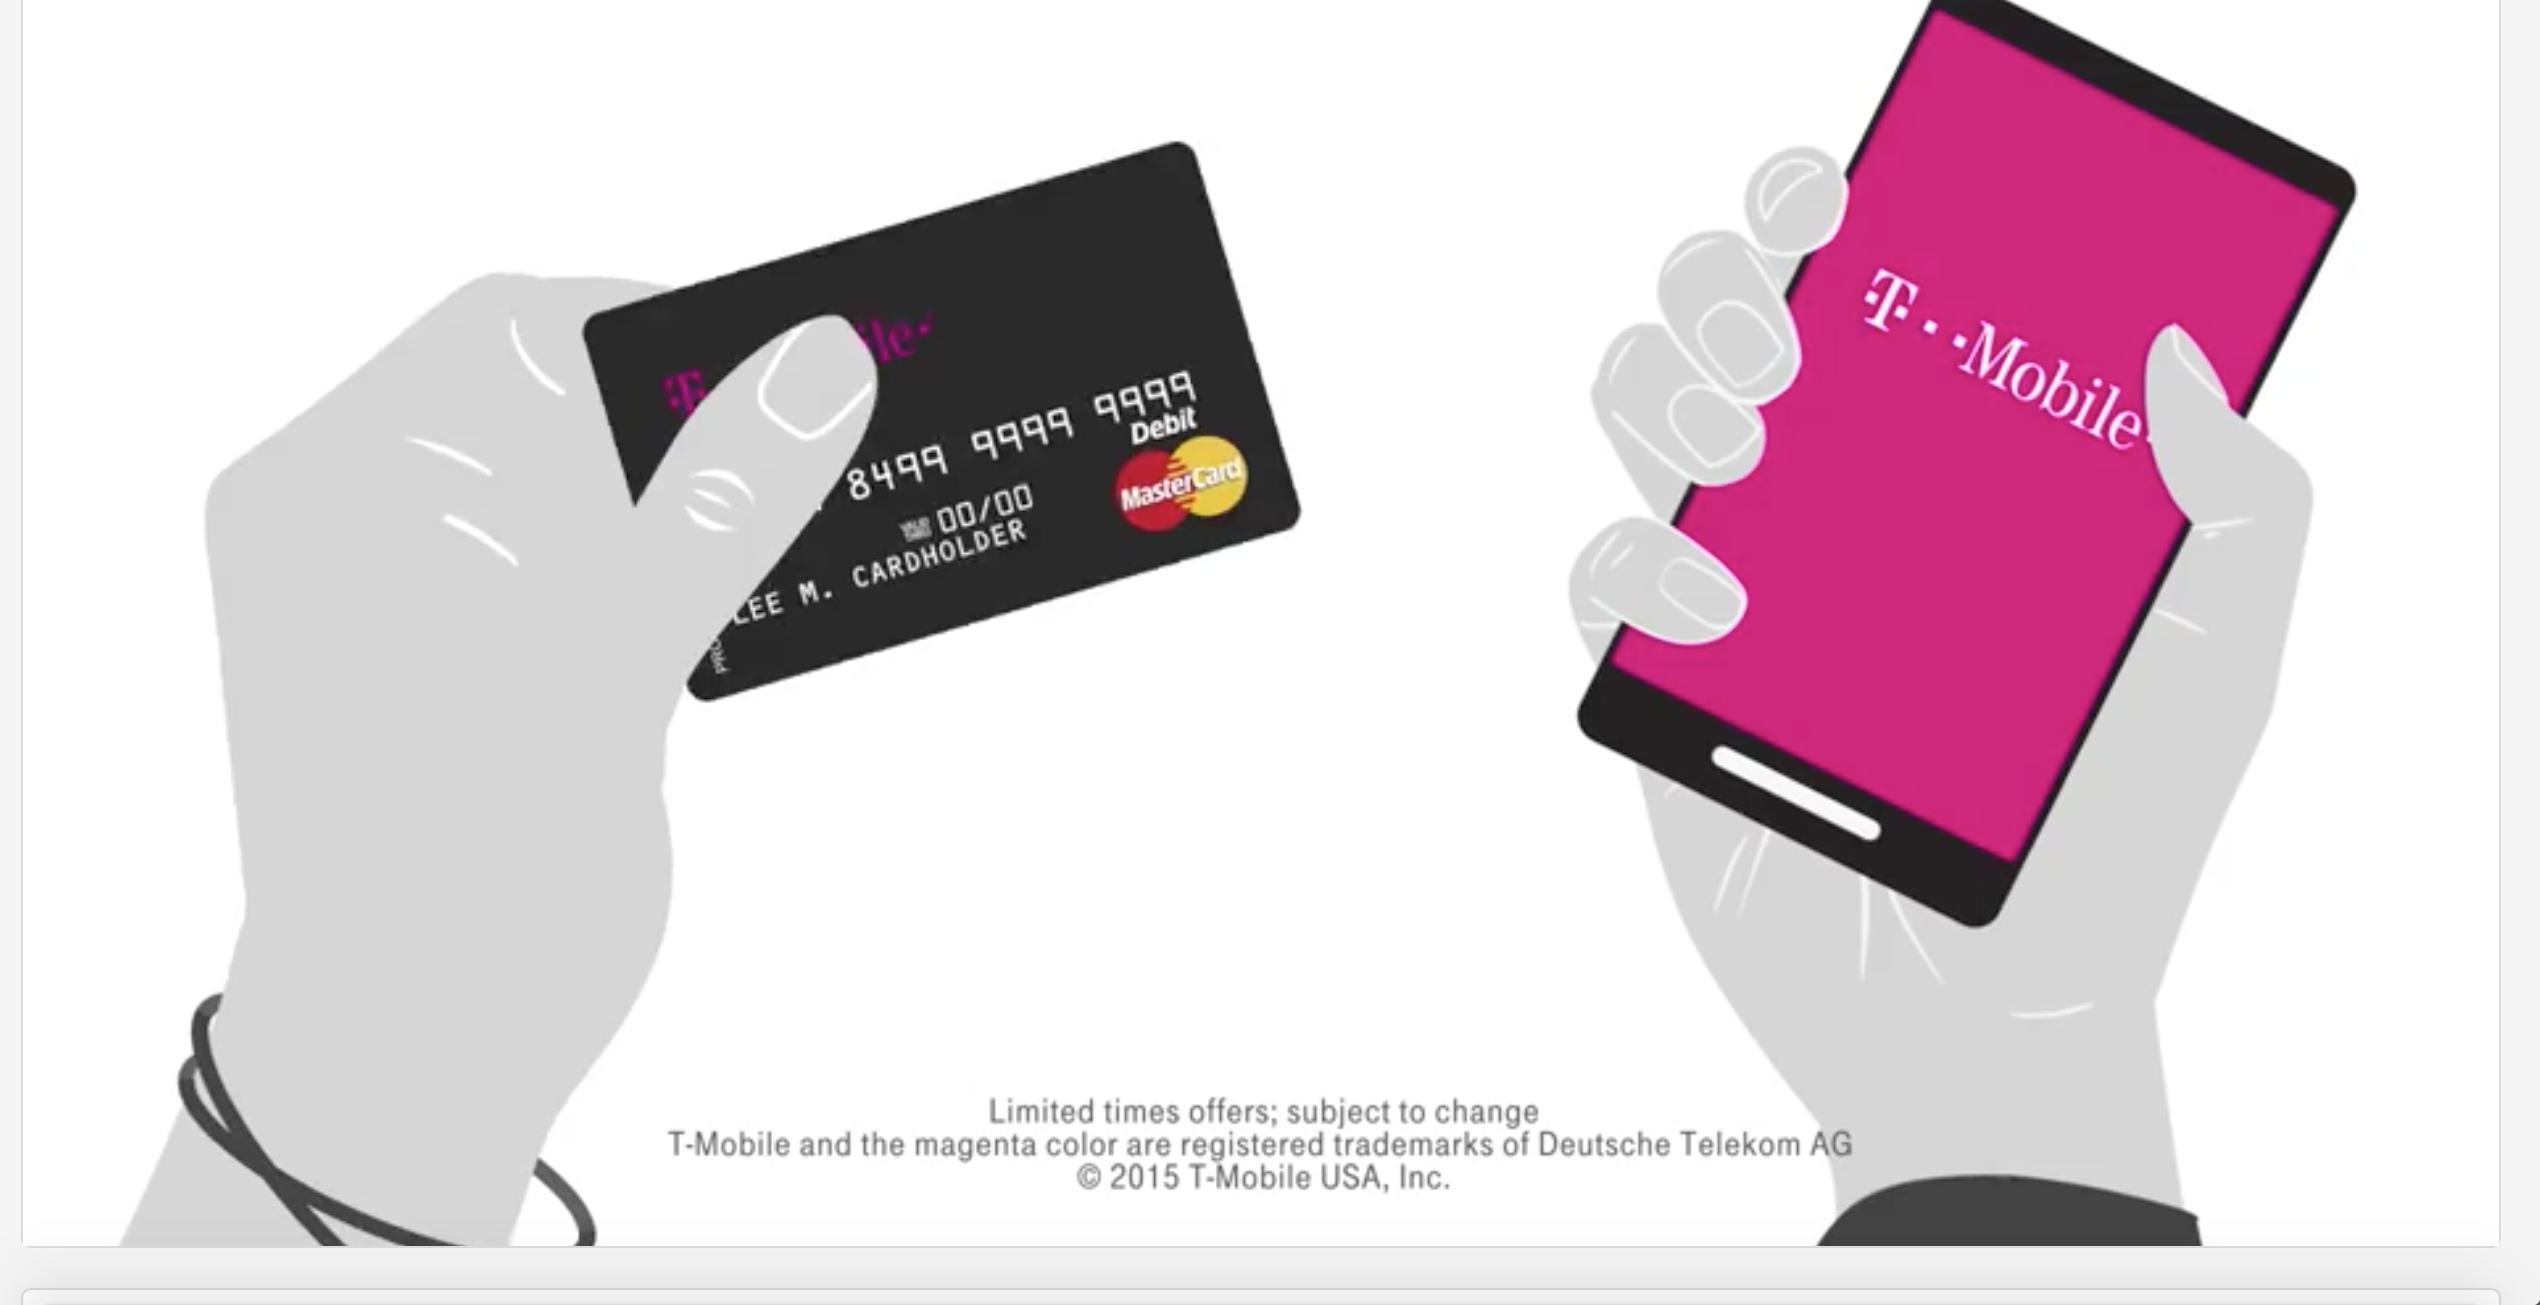 Ad Watchdog: T-Mobile Should Explain Better How ‘Ditch And Switch’ Payments Work